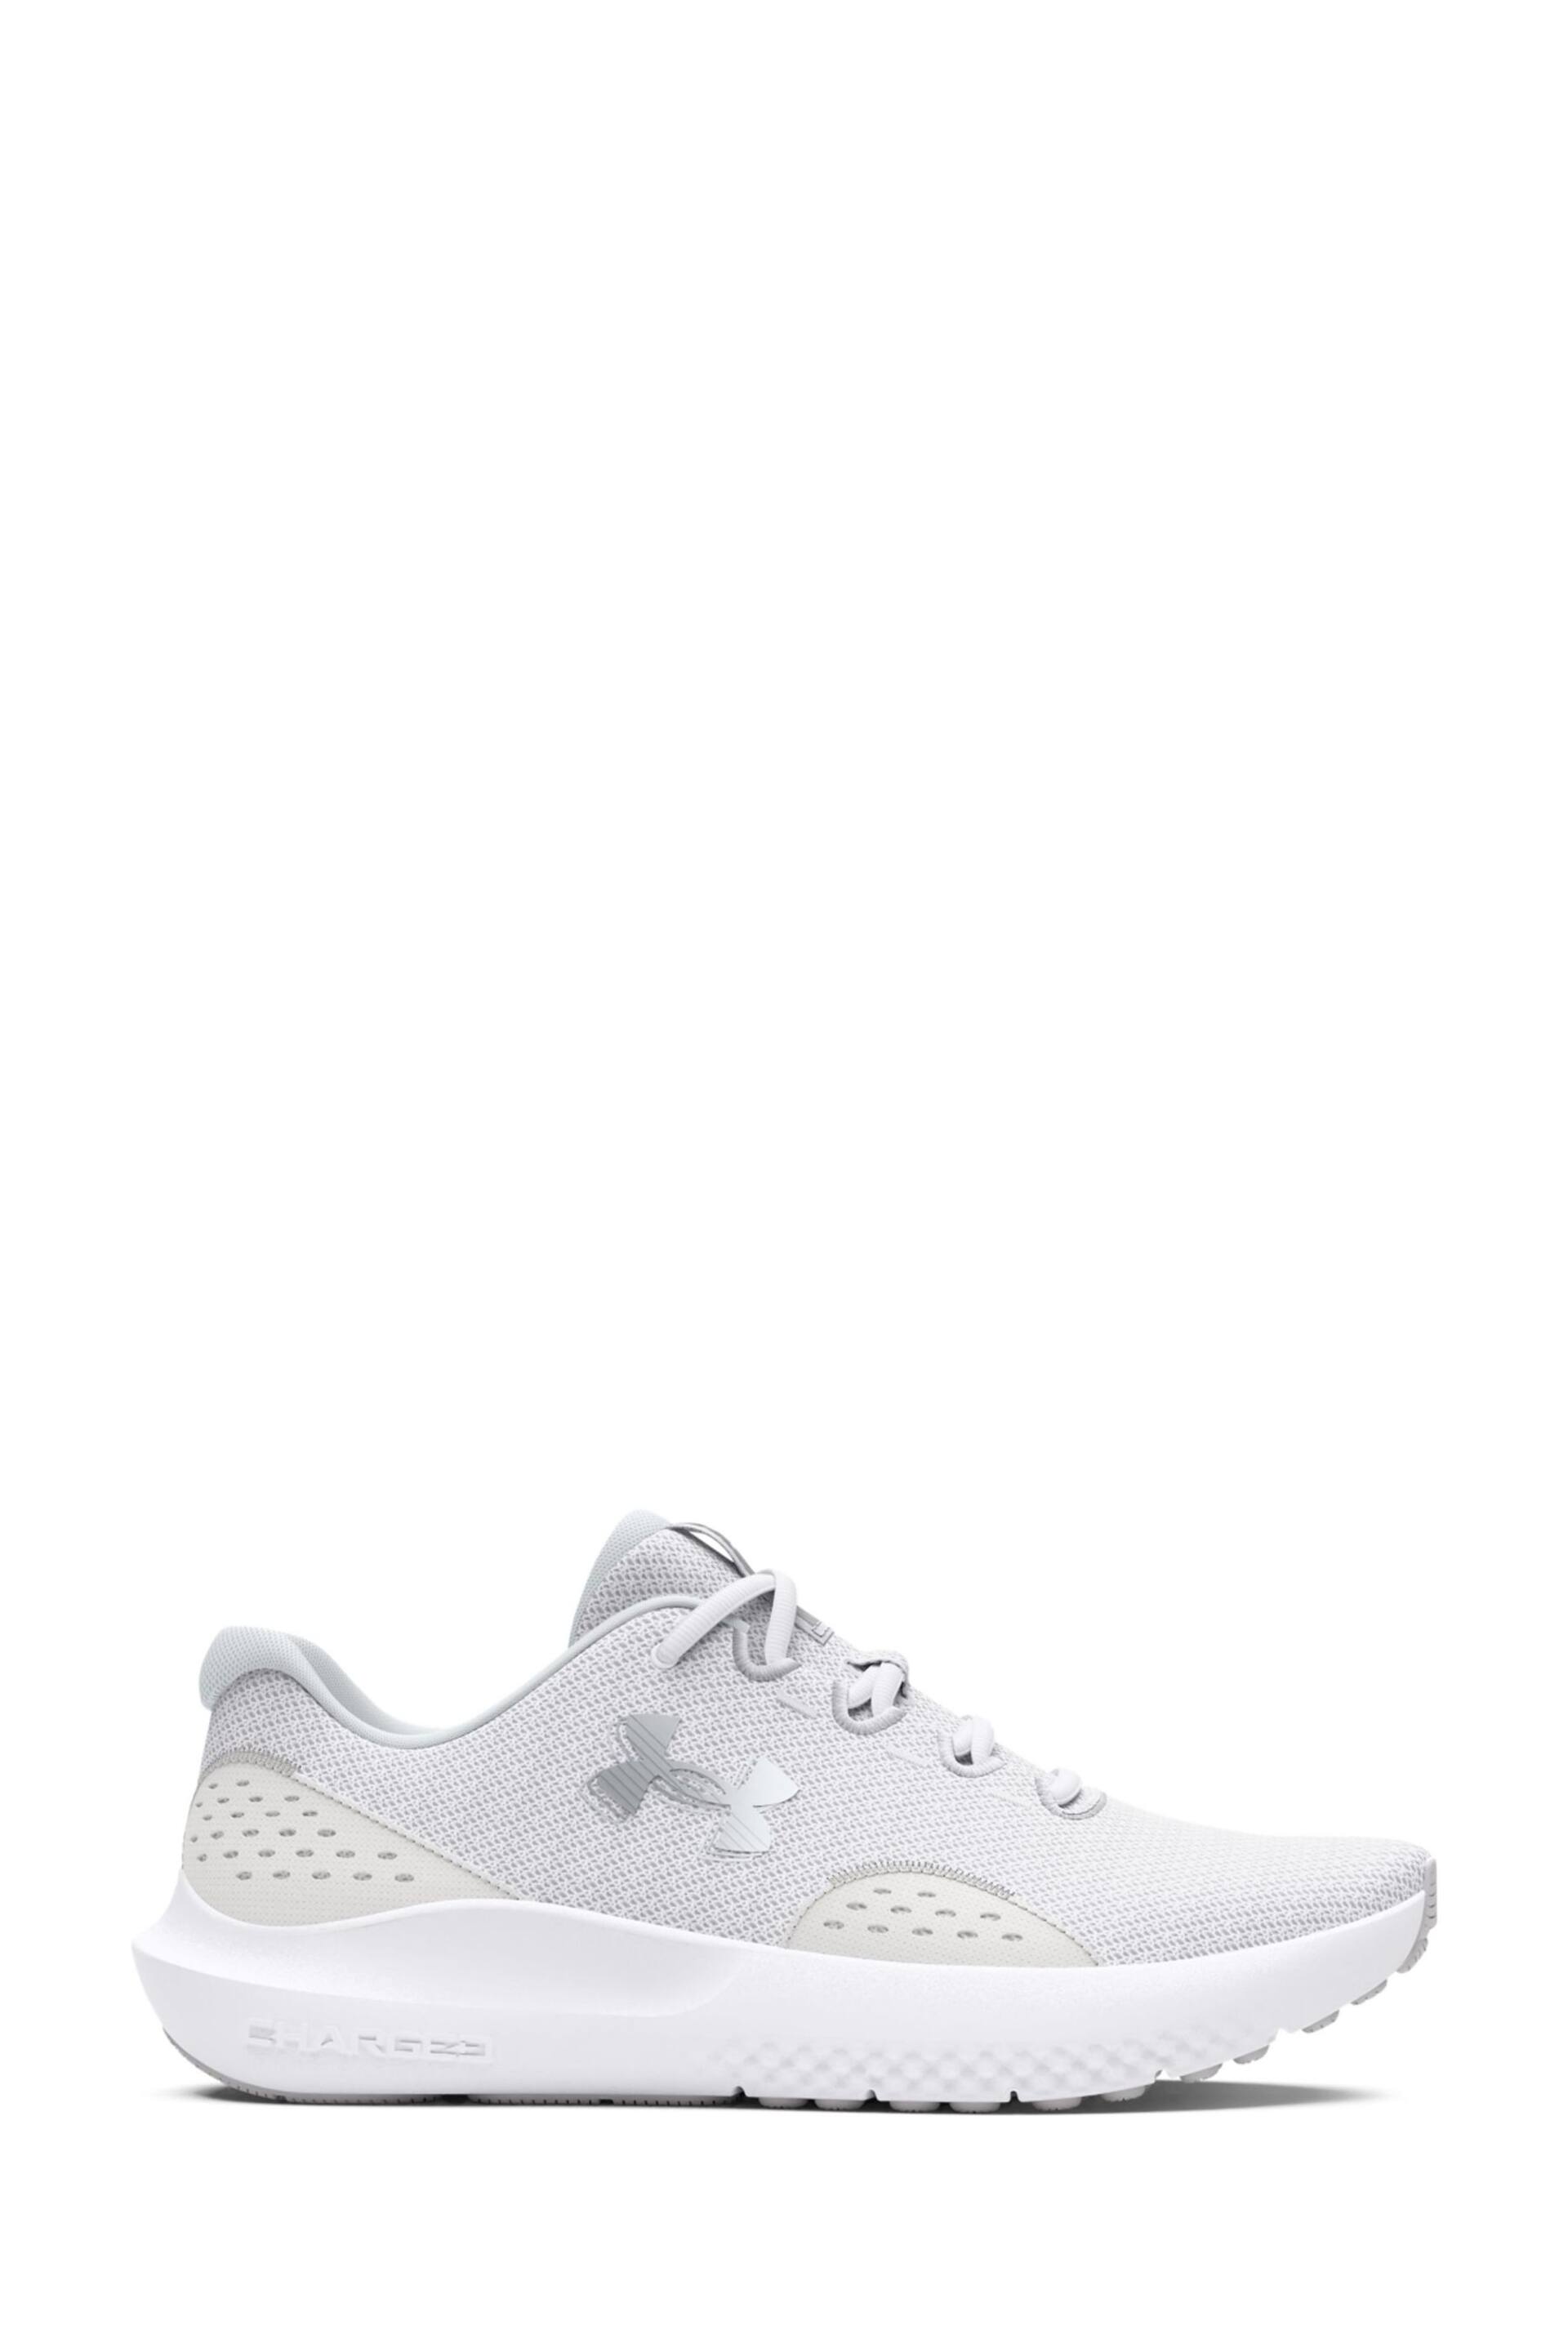 Under Armour White Ground Charged Surge Trainers - Image 1 of 6